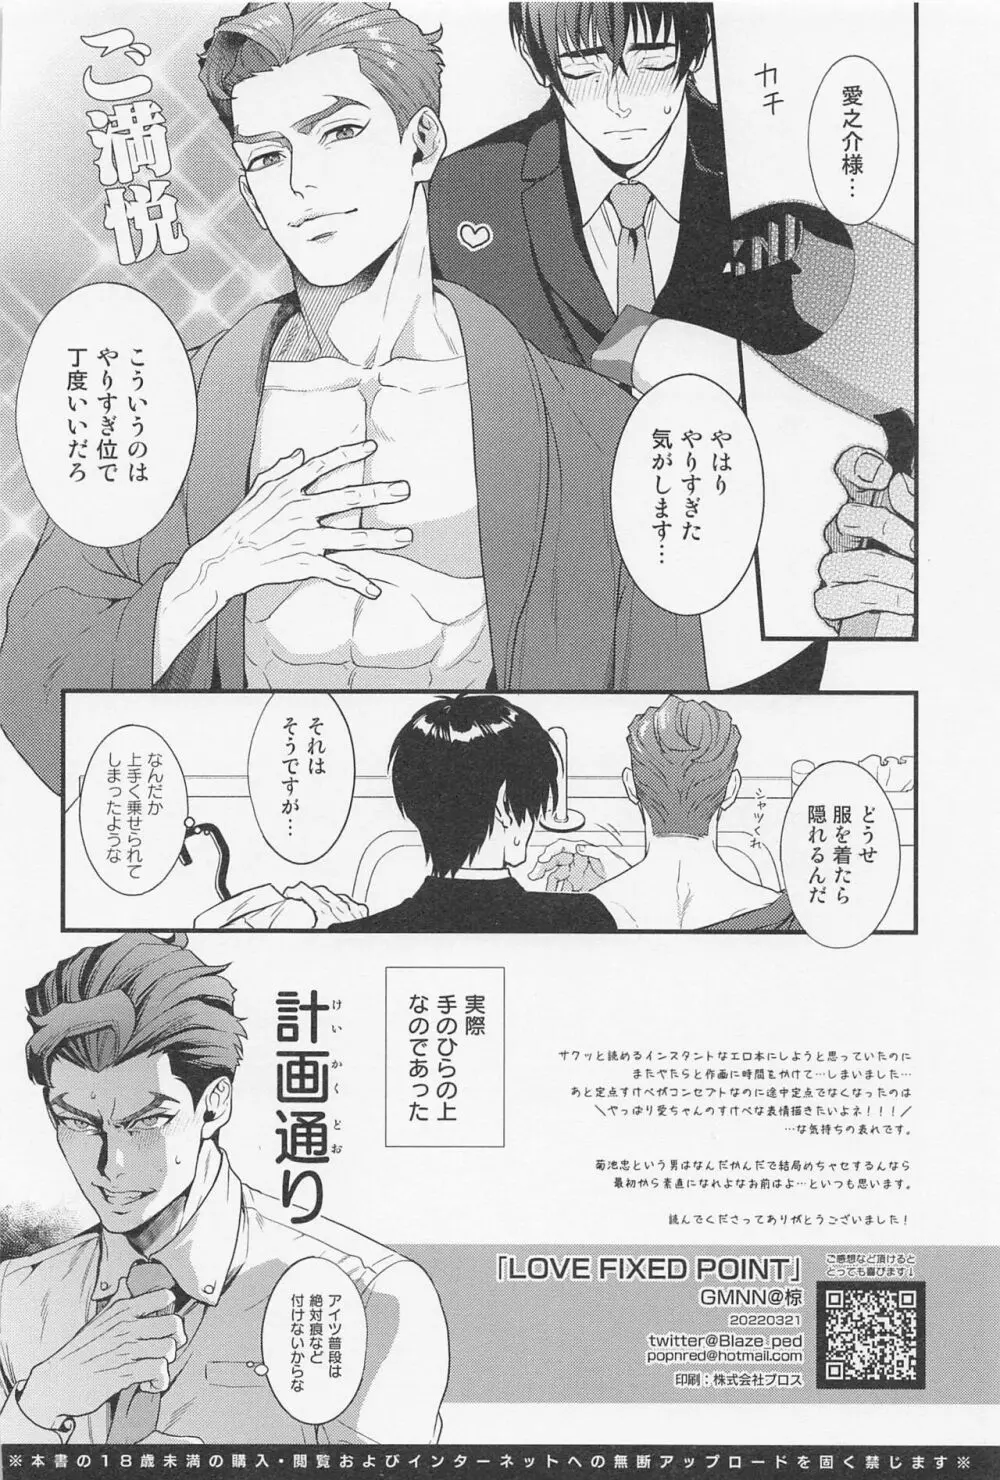 LOVE FIXED POINT - 愛の定点観測 Page.33